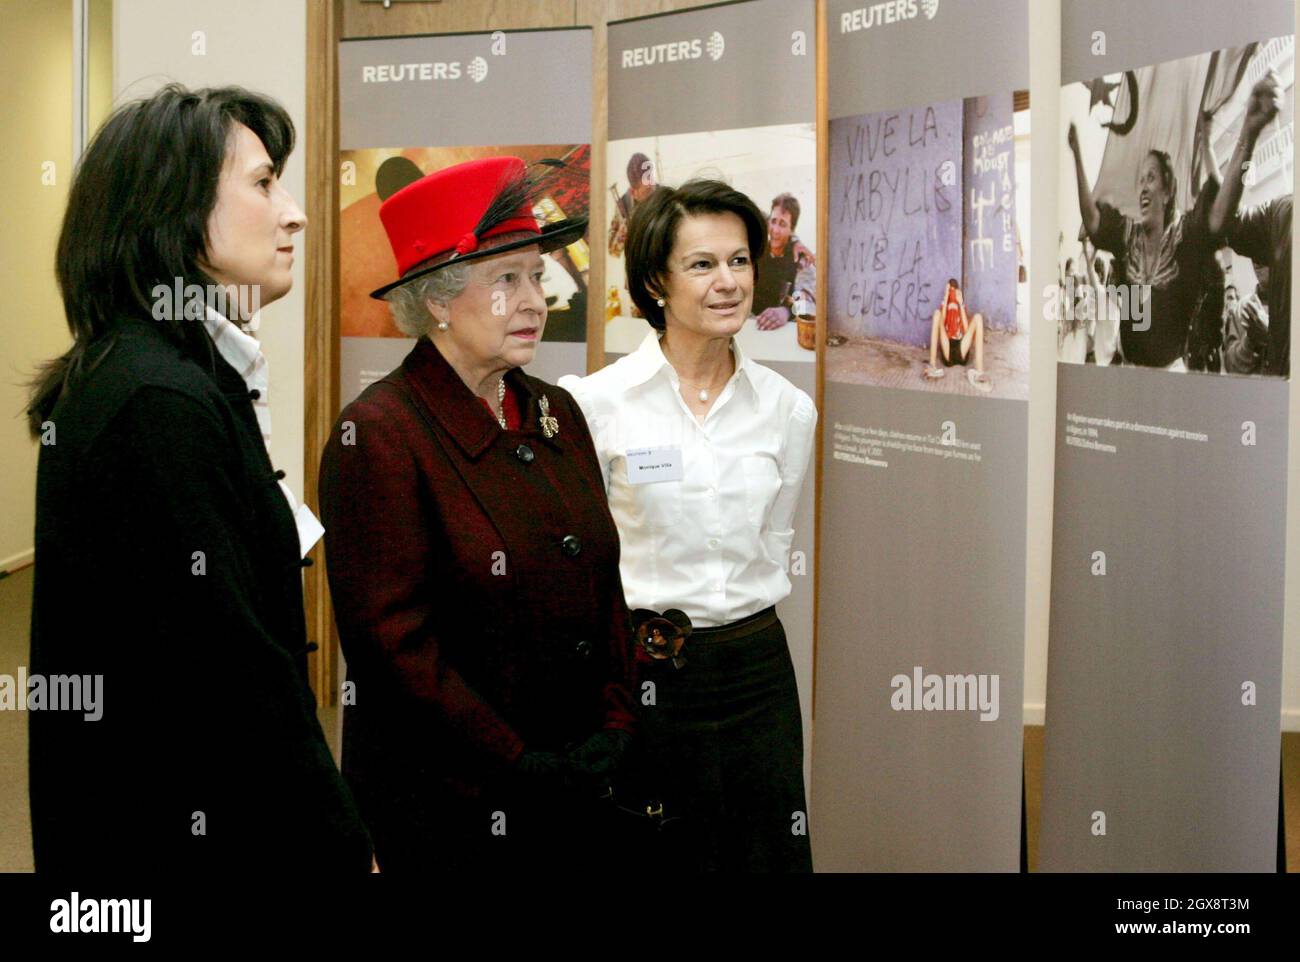 Queen Elizabeth II is shown a photographic exhibition of pictures by Reuters photographer Zohra Bensemra by Reuters' Senior Vice President and Global Head of News and Pictures, Monique Villa, during a visit to the Reuters building at Canary Wharf in London. The Queen visited Reuters' new global headquarters and then sent a simulated despatch to mark the official opening of the building. Anwar Hussein/allactiondigital.com Stock Photo